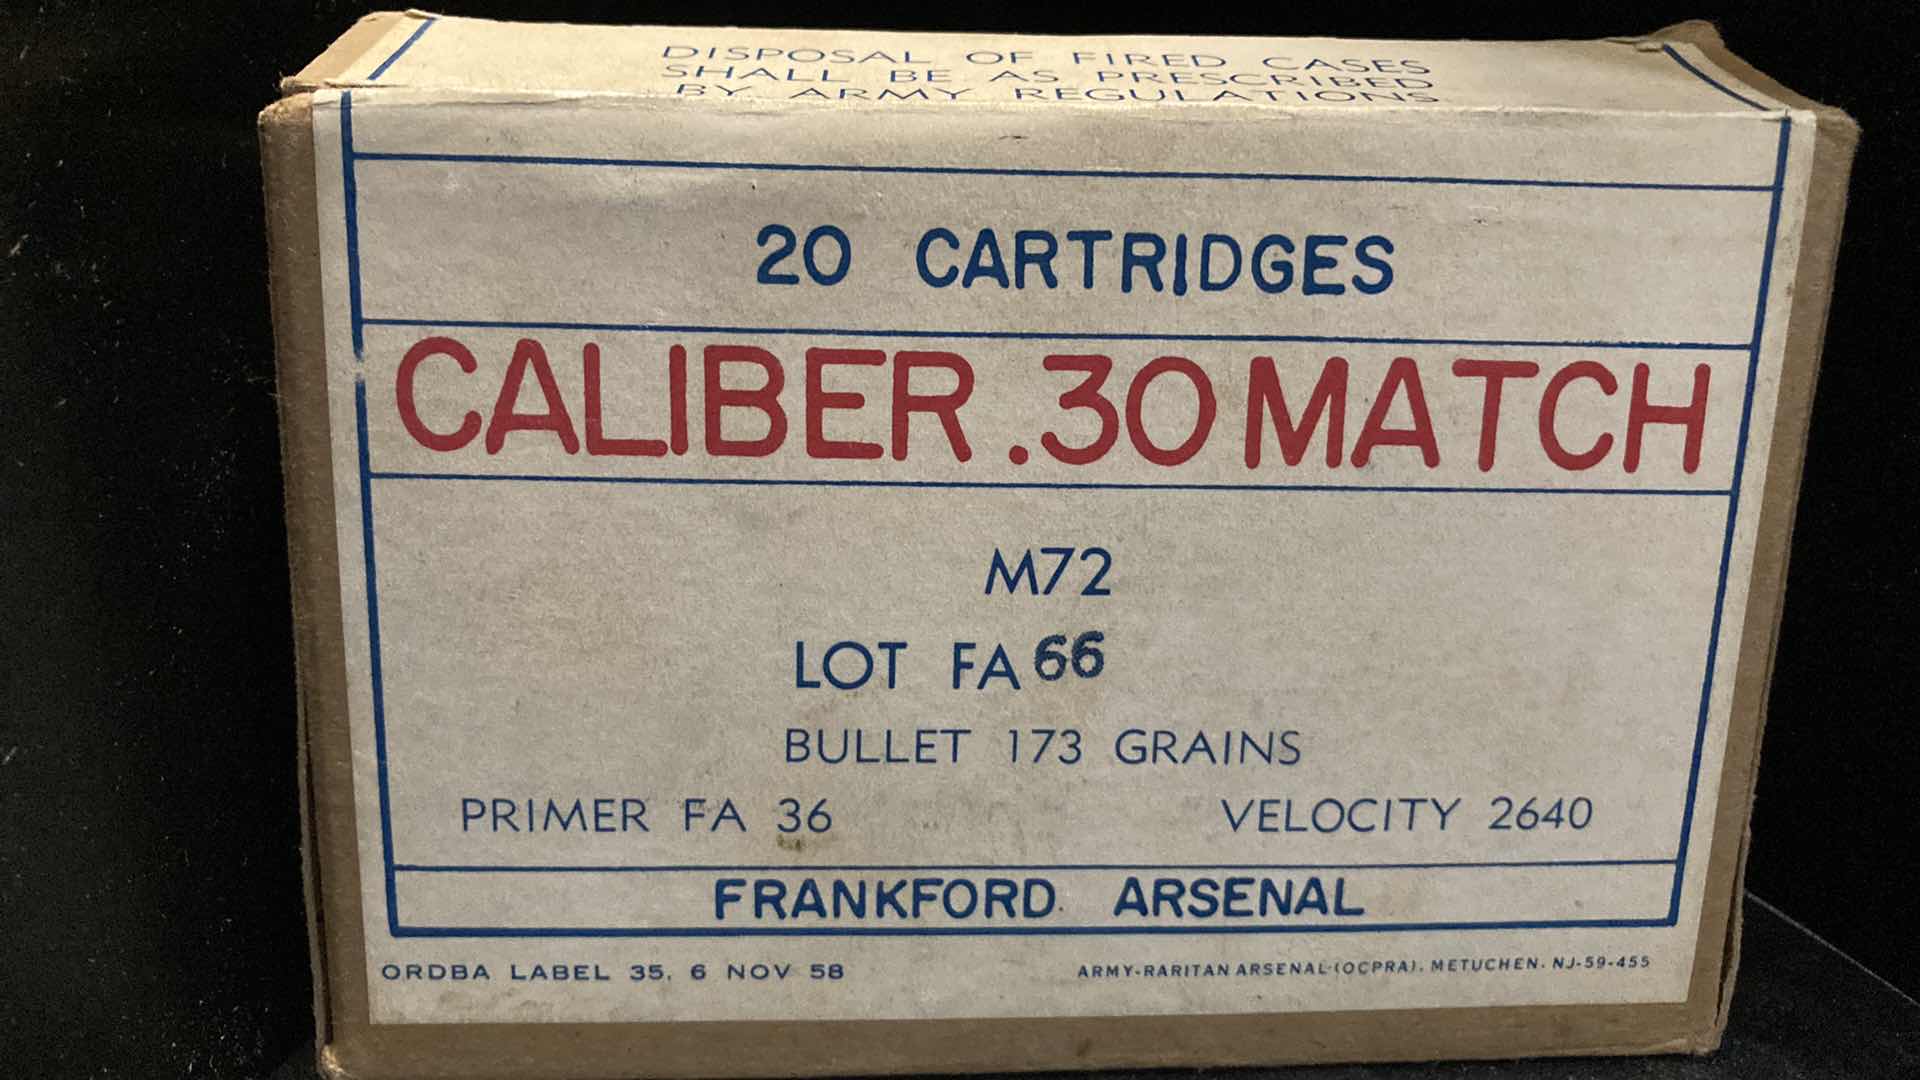 Photo 2 of FRANK FORD ARSENAL 30 MATCH AMMO (20)